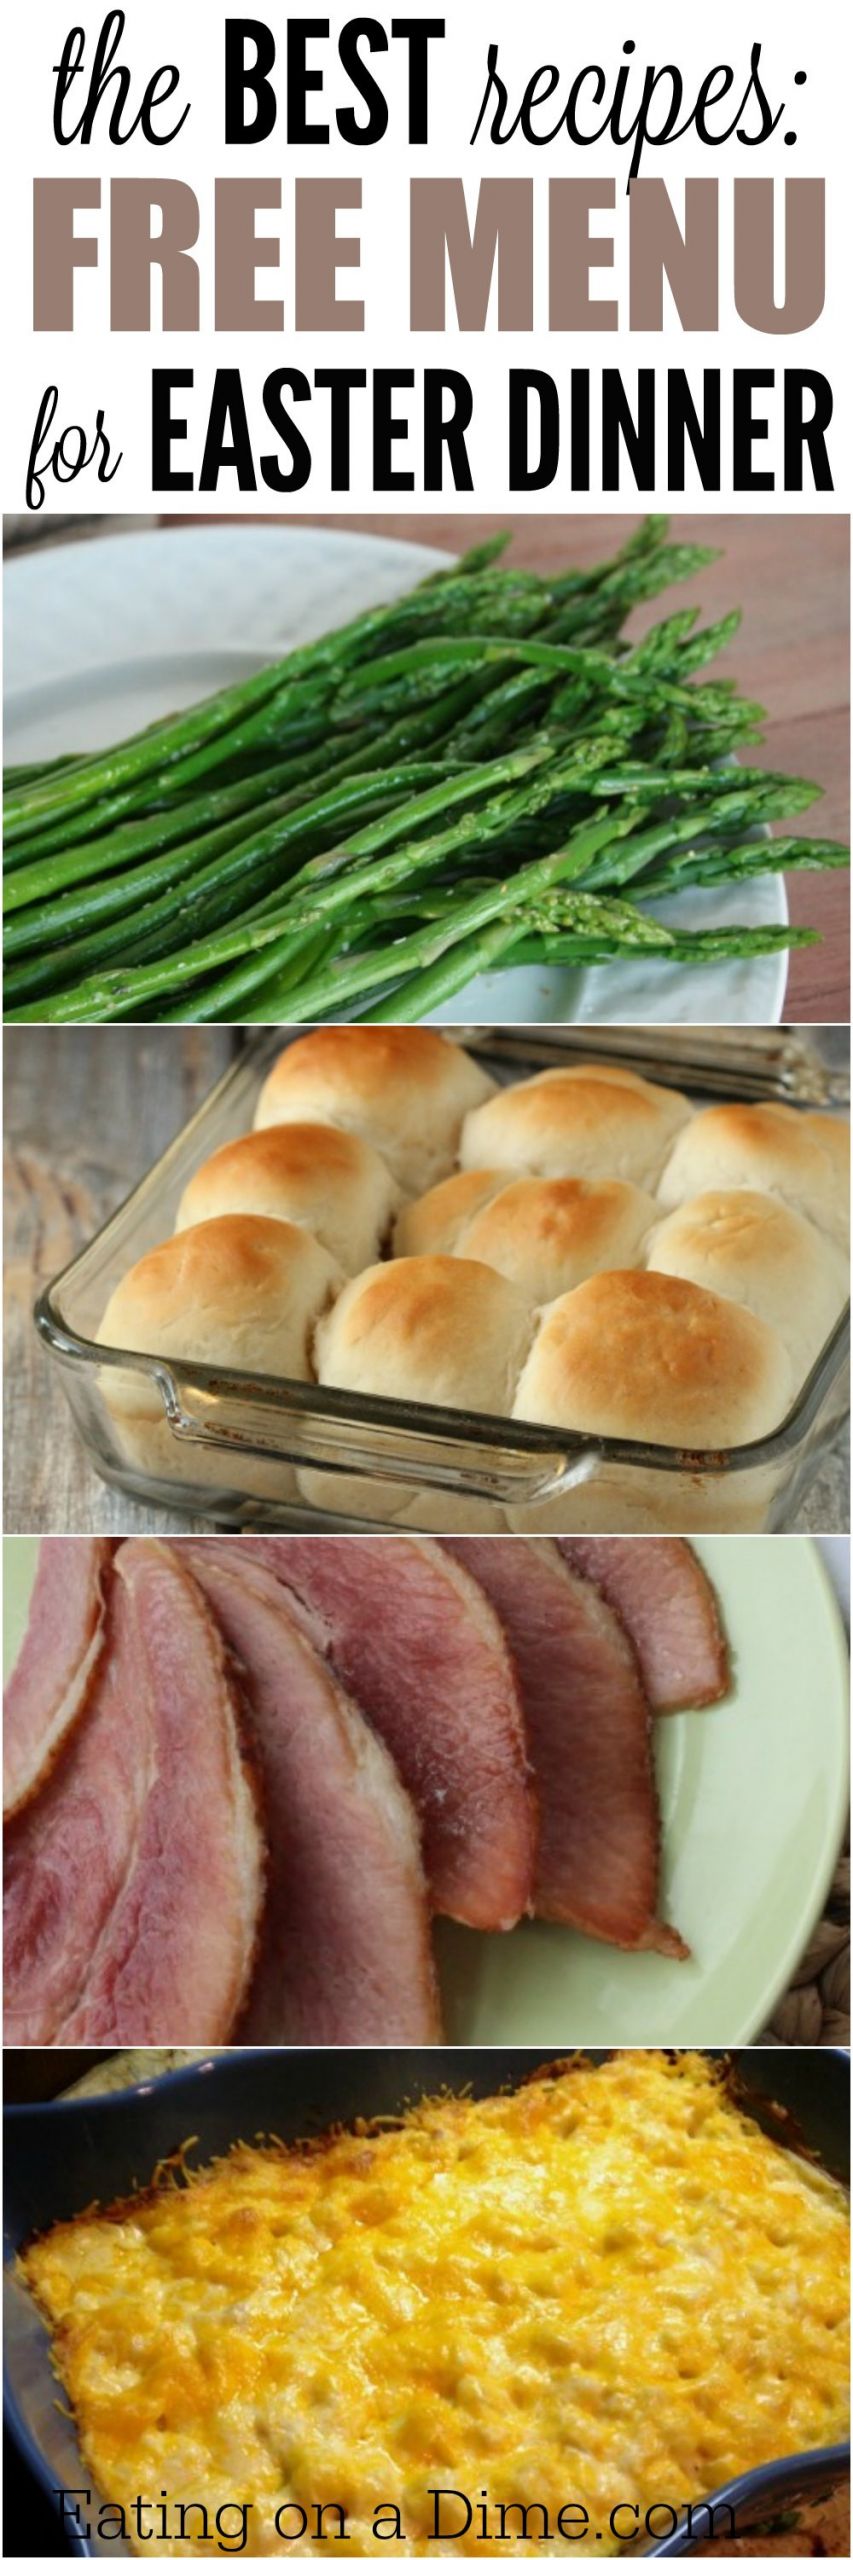 Easy Easter Menu Ideas
 Easter Menu Ideas and Recipes The Best Easter Dinner recipes